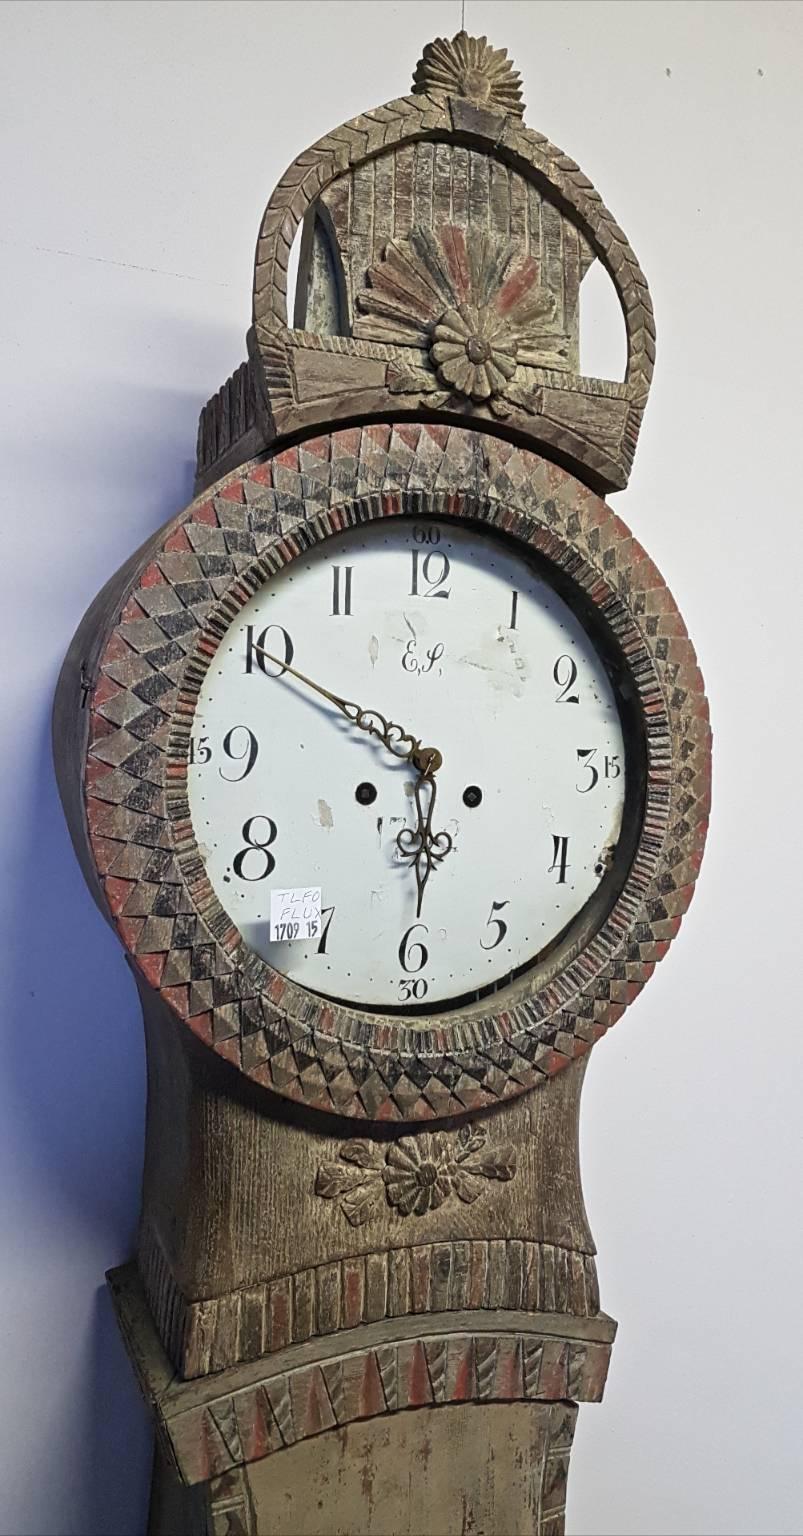 Incredibly rare antique Swedish Ångermanlandsbrud Bridal mora clock from Ångermanlands.

This clock has amazing detail to it with a host of fine carving and original paint that is heavily patinated and distressed by age. It has faded reds, greens,